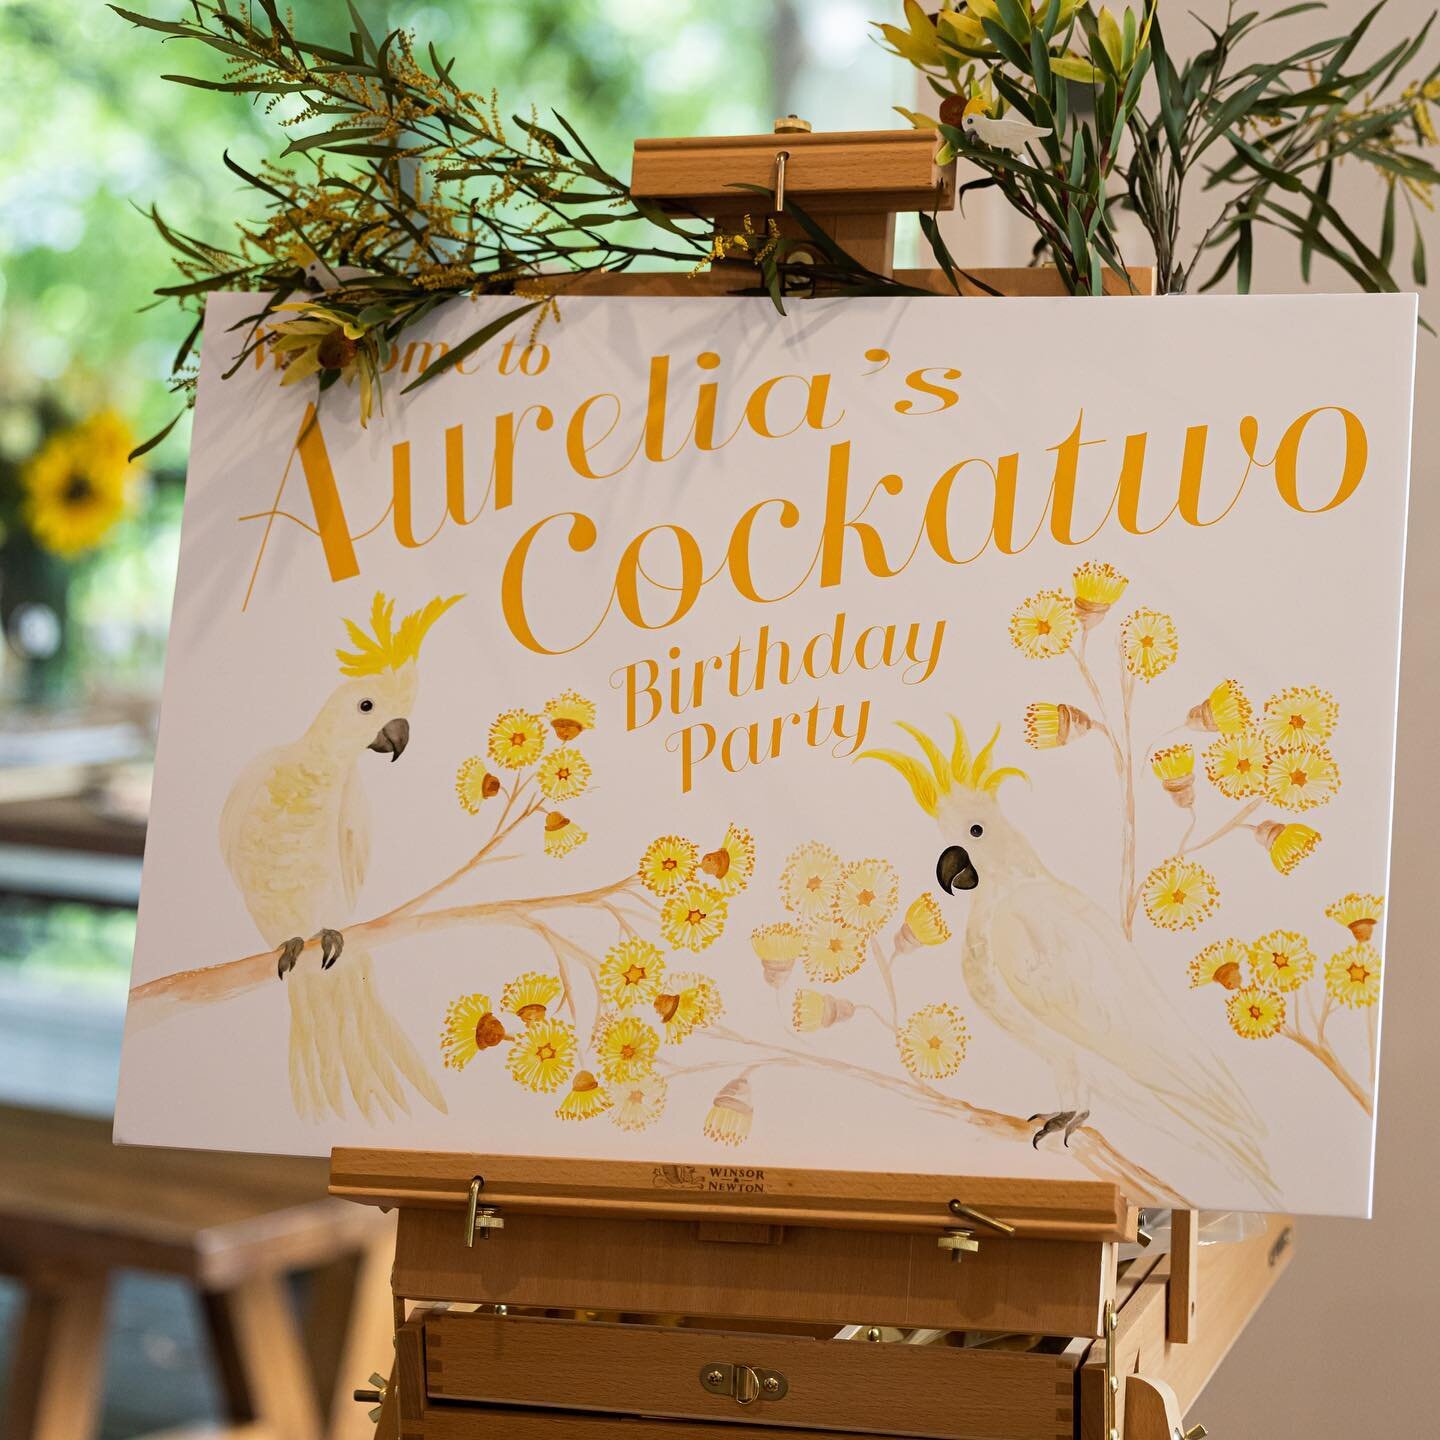 Here is the welcome sign I made for my daughters second birthday - A &ldquo;Cockatwo&rdquo; theme. Celebrating her love of birds, interest in cockatoos and her cheeky sunshine spirit. I loved creating this party for her, painting cockatoos and baking